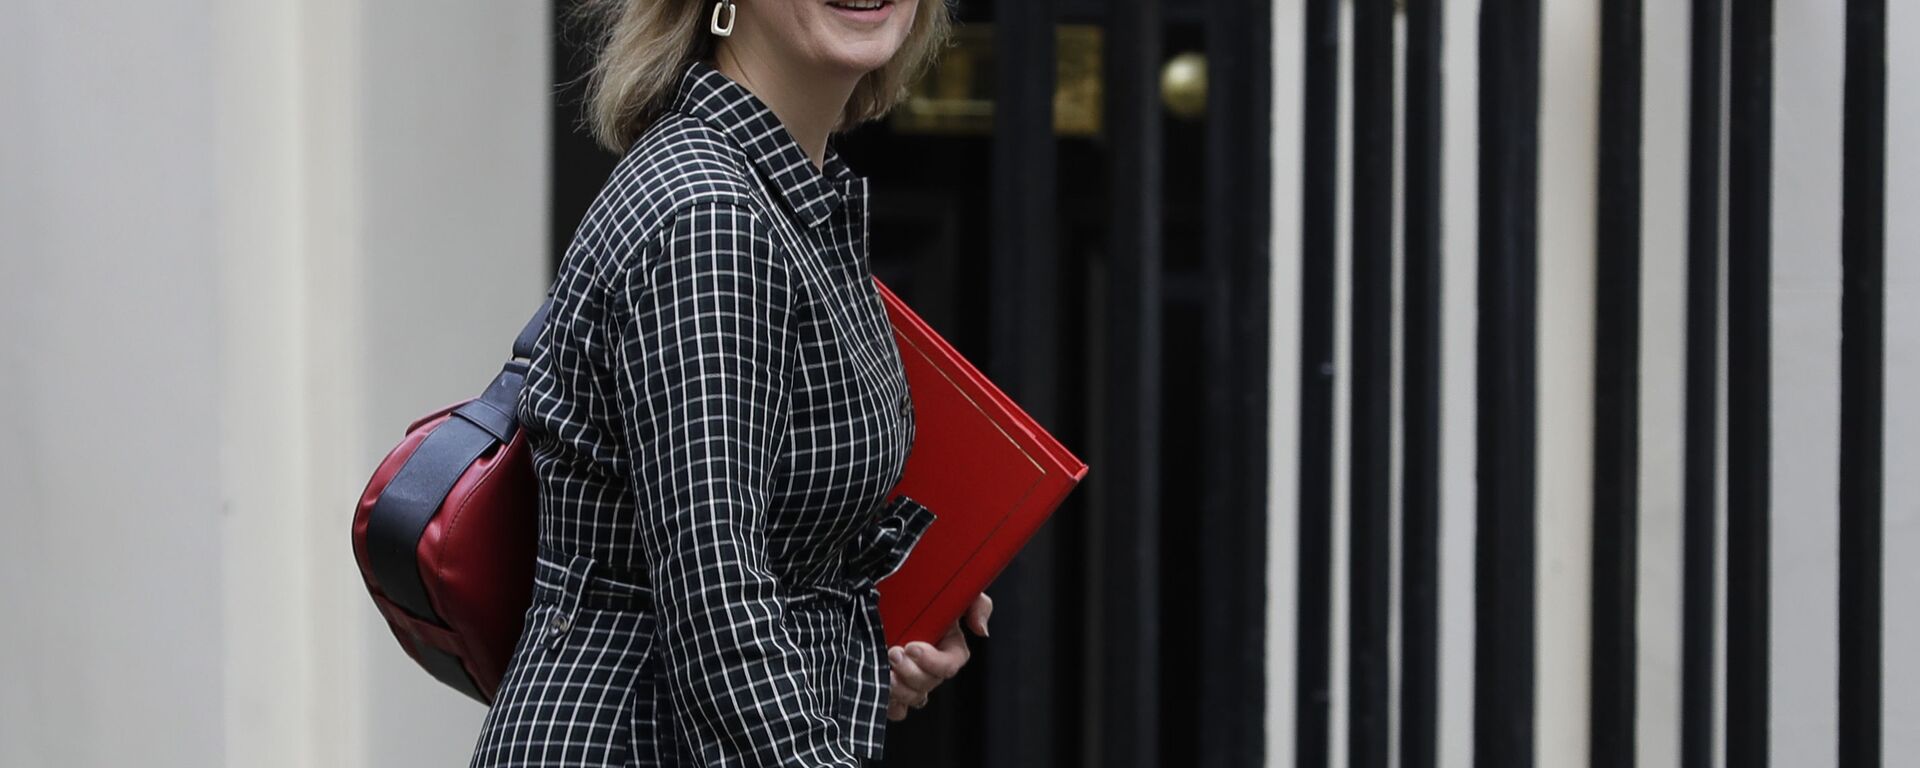 Britain's Secretary of State for International Trade Elizabeth Truss arrives for a Cabinet meeting at 10 Downing Street in London, Wednesday, Oct. 16, 2019 - Sputnik International, 1920, 29.09.2022